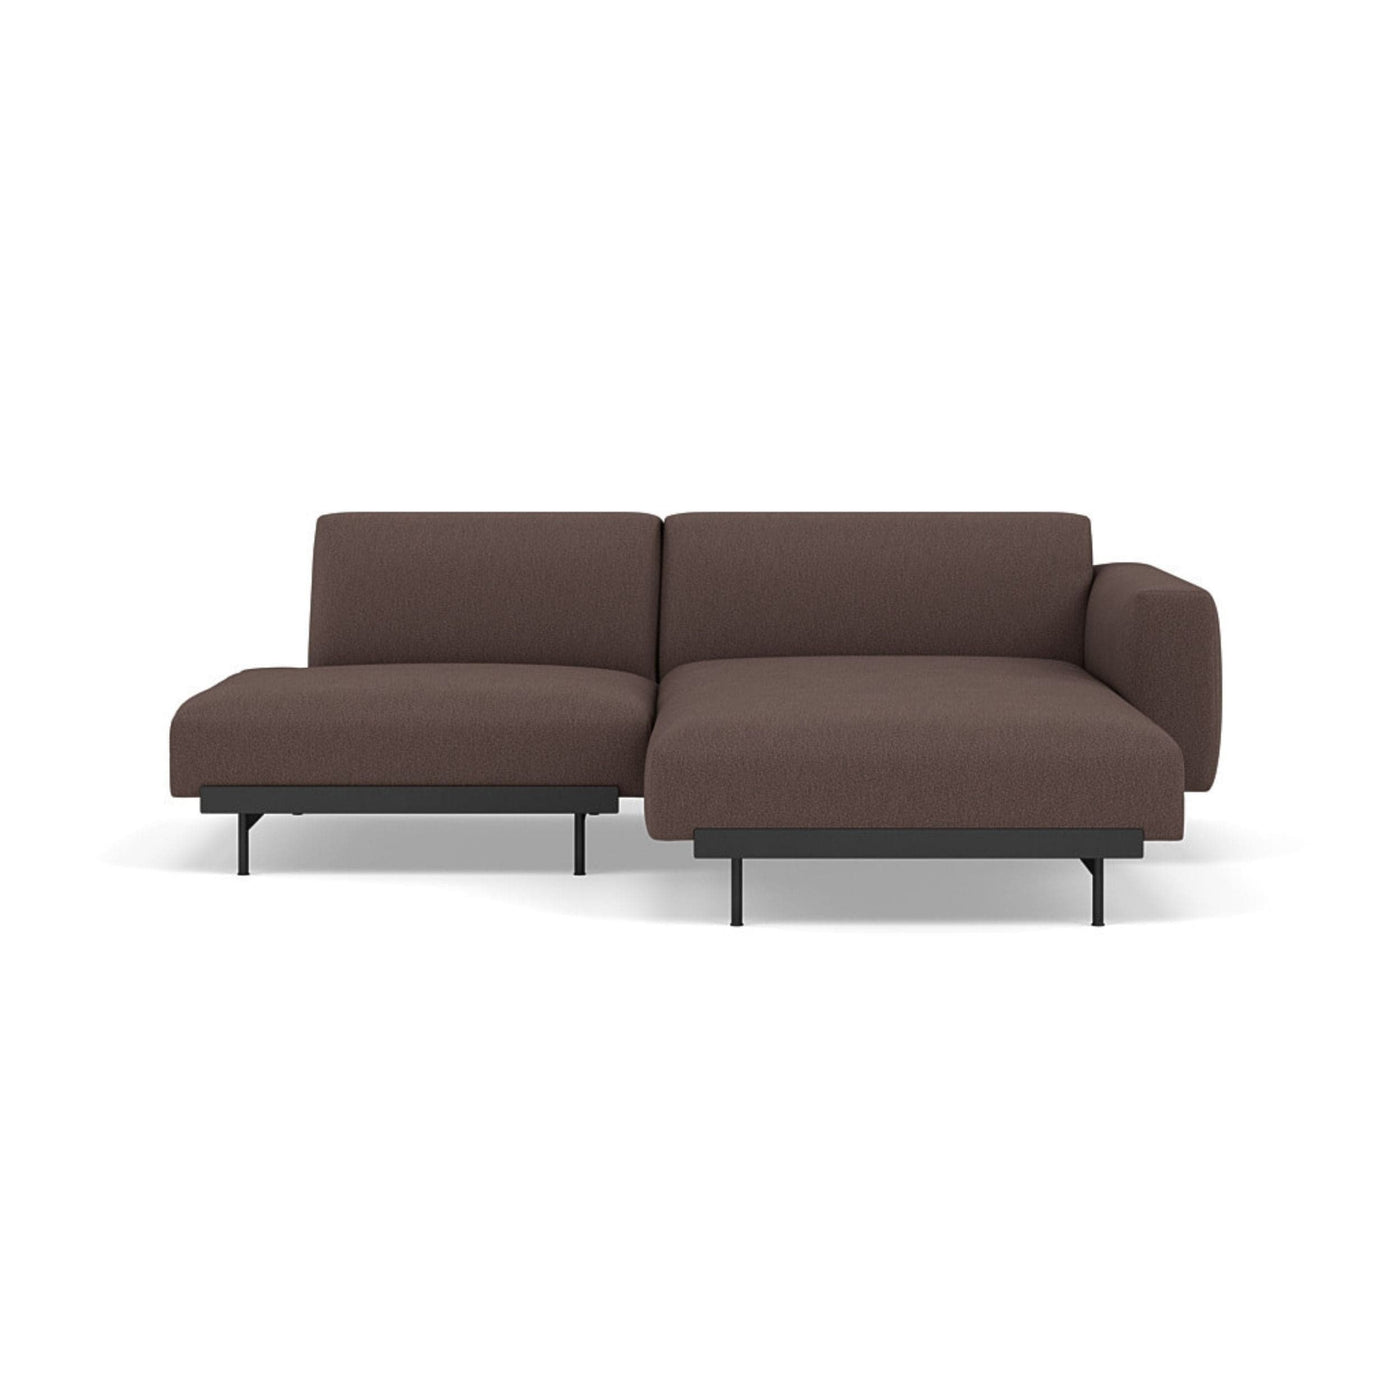 Muuto In Situ Modular 2 Seater Sofa, configuration 7 in clay 6 fabric. Made to order from someday designs #colour_clay-6-red-brown